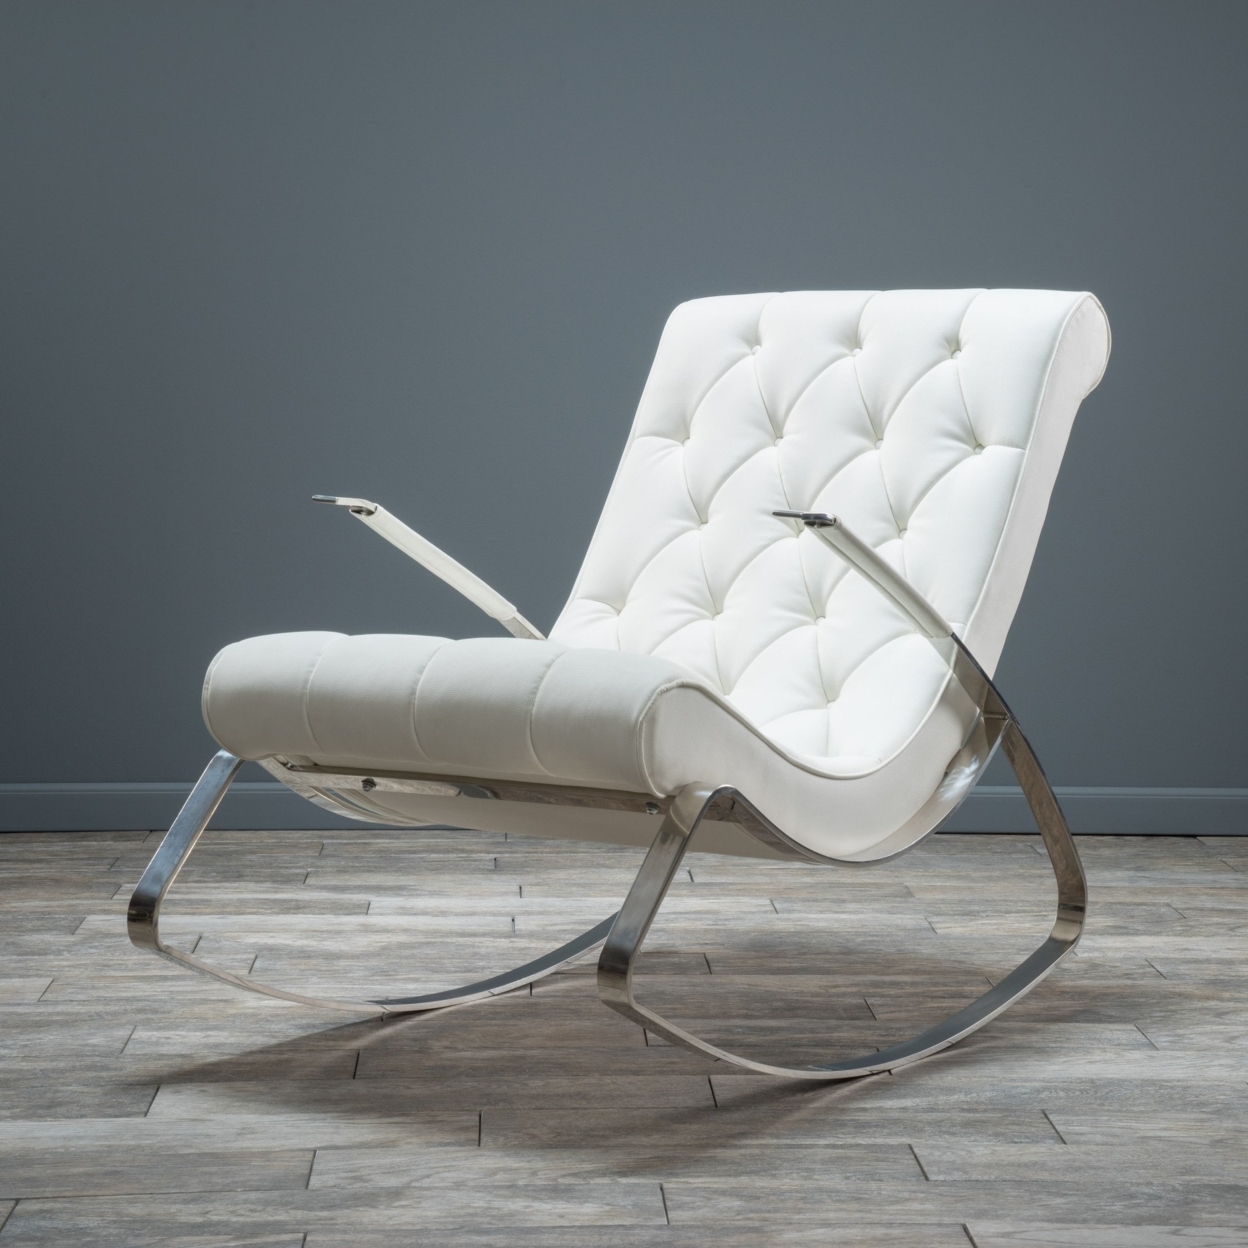 Buy Barcelona-City Modern Design Rocking Lounge Chair by GDFStudio on